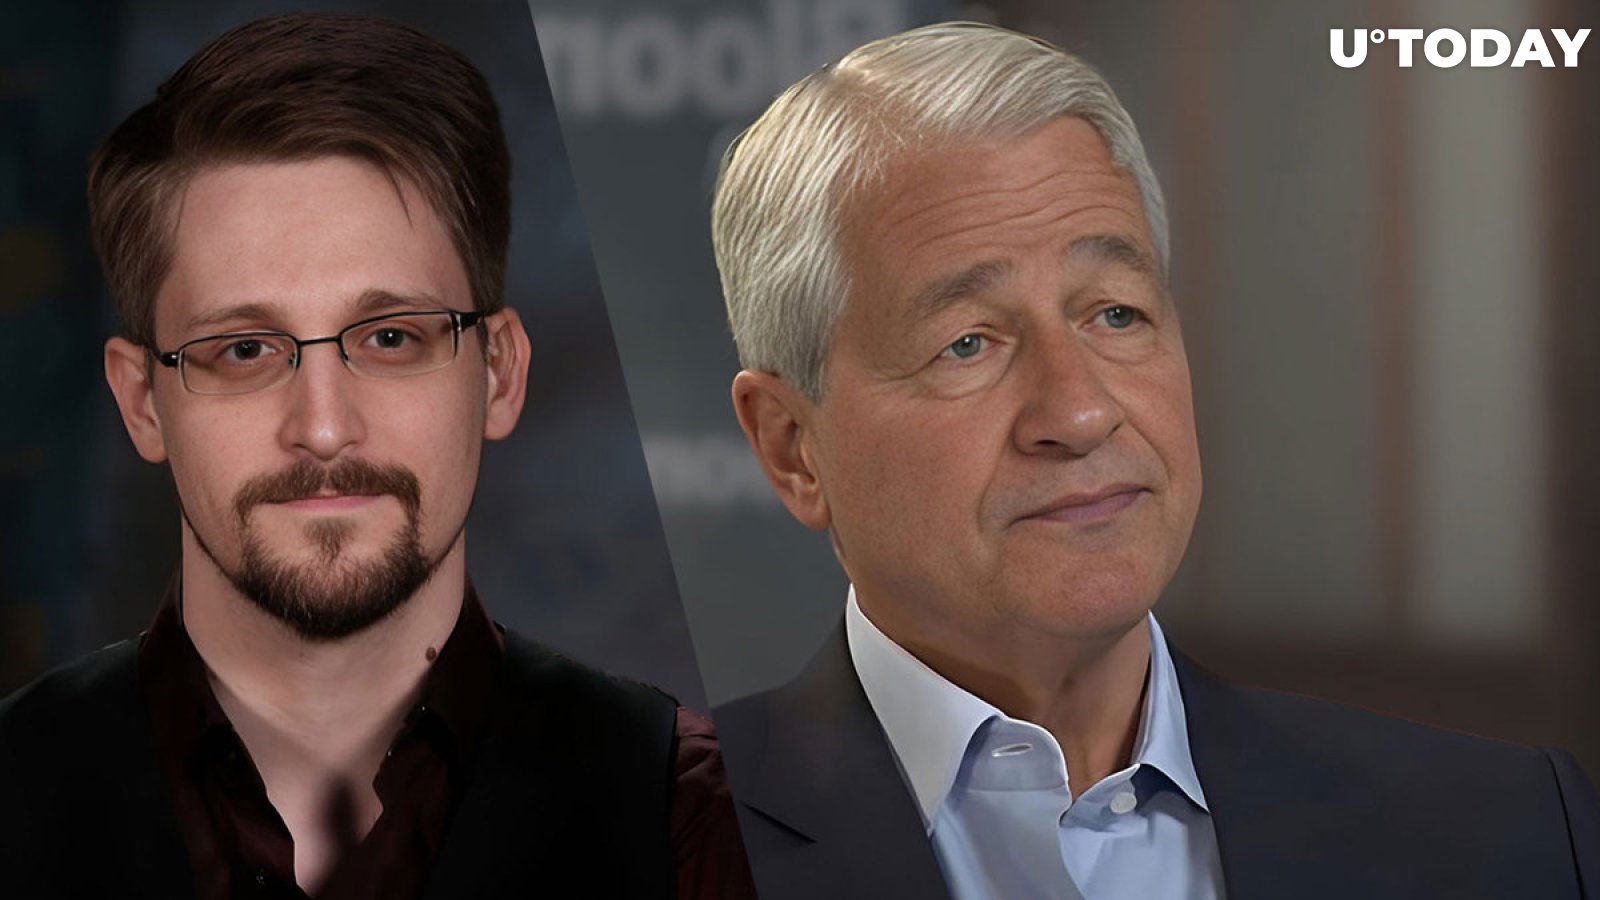 Snowden Roasts JP Morgan CEO Over Bitcoin Price and Purchases